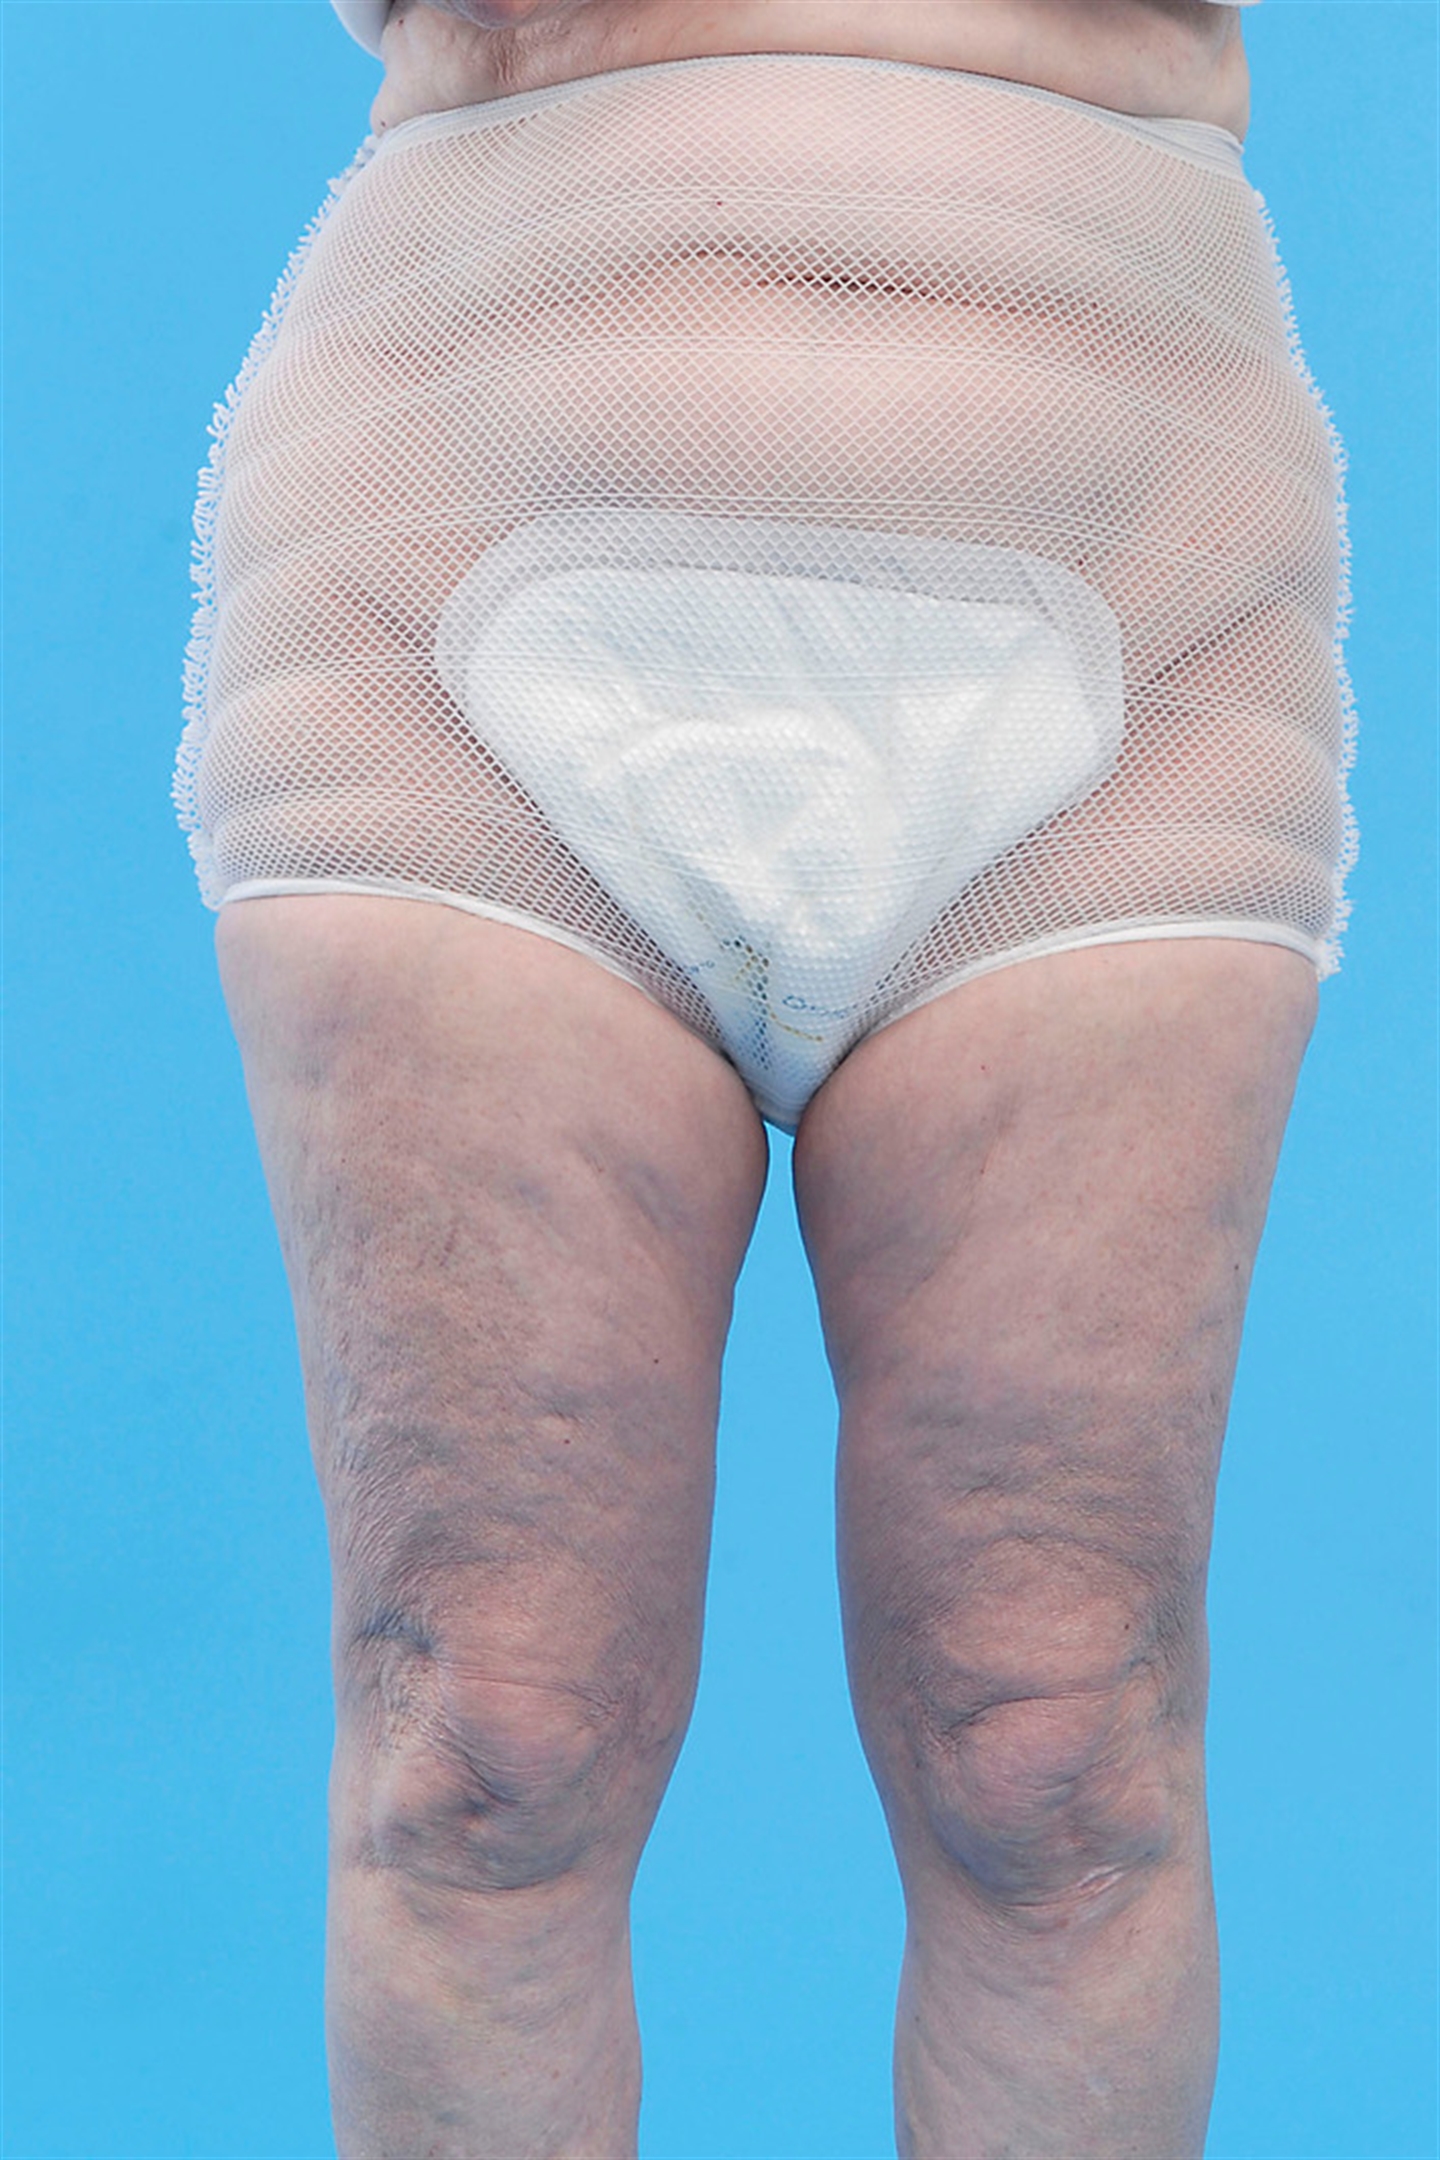 Large disposable pad with net support pants